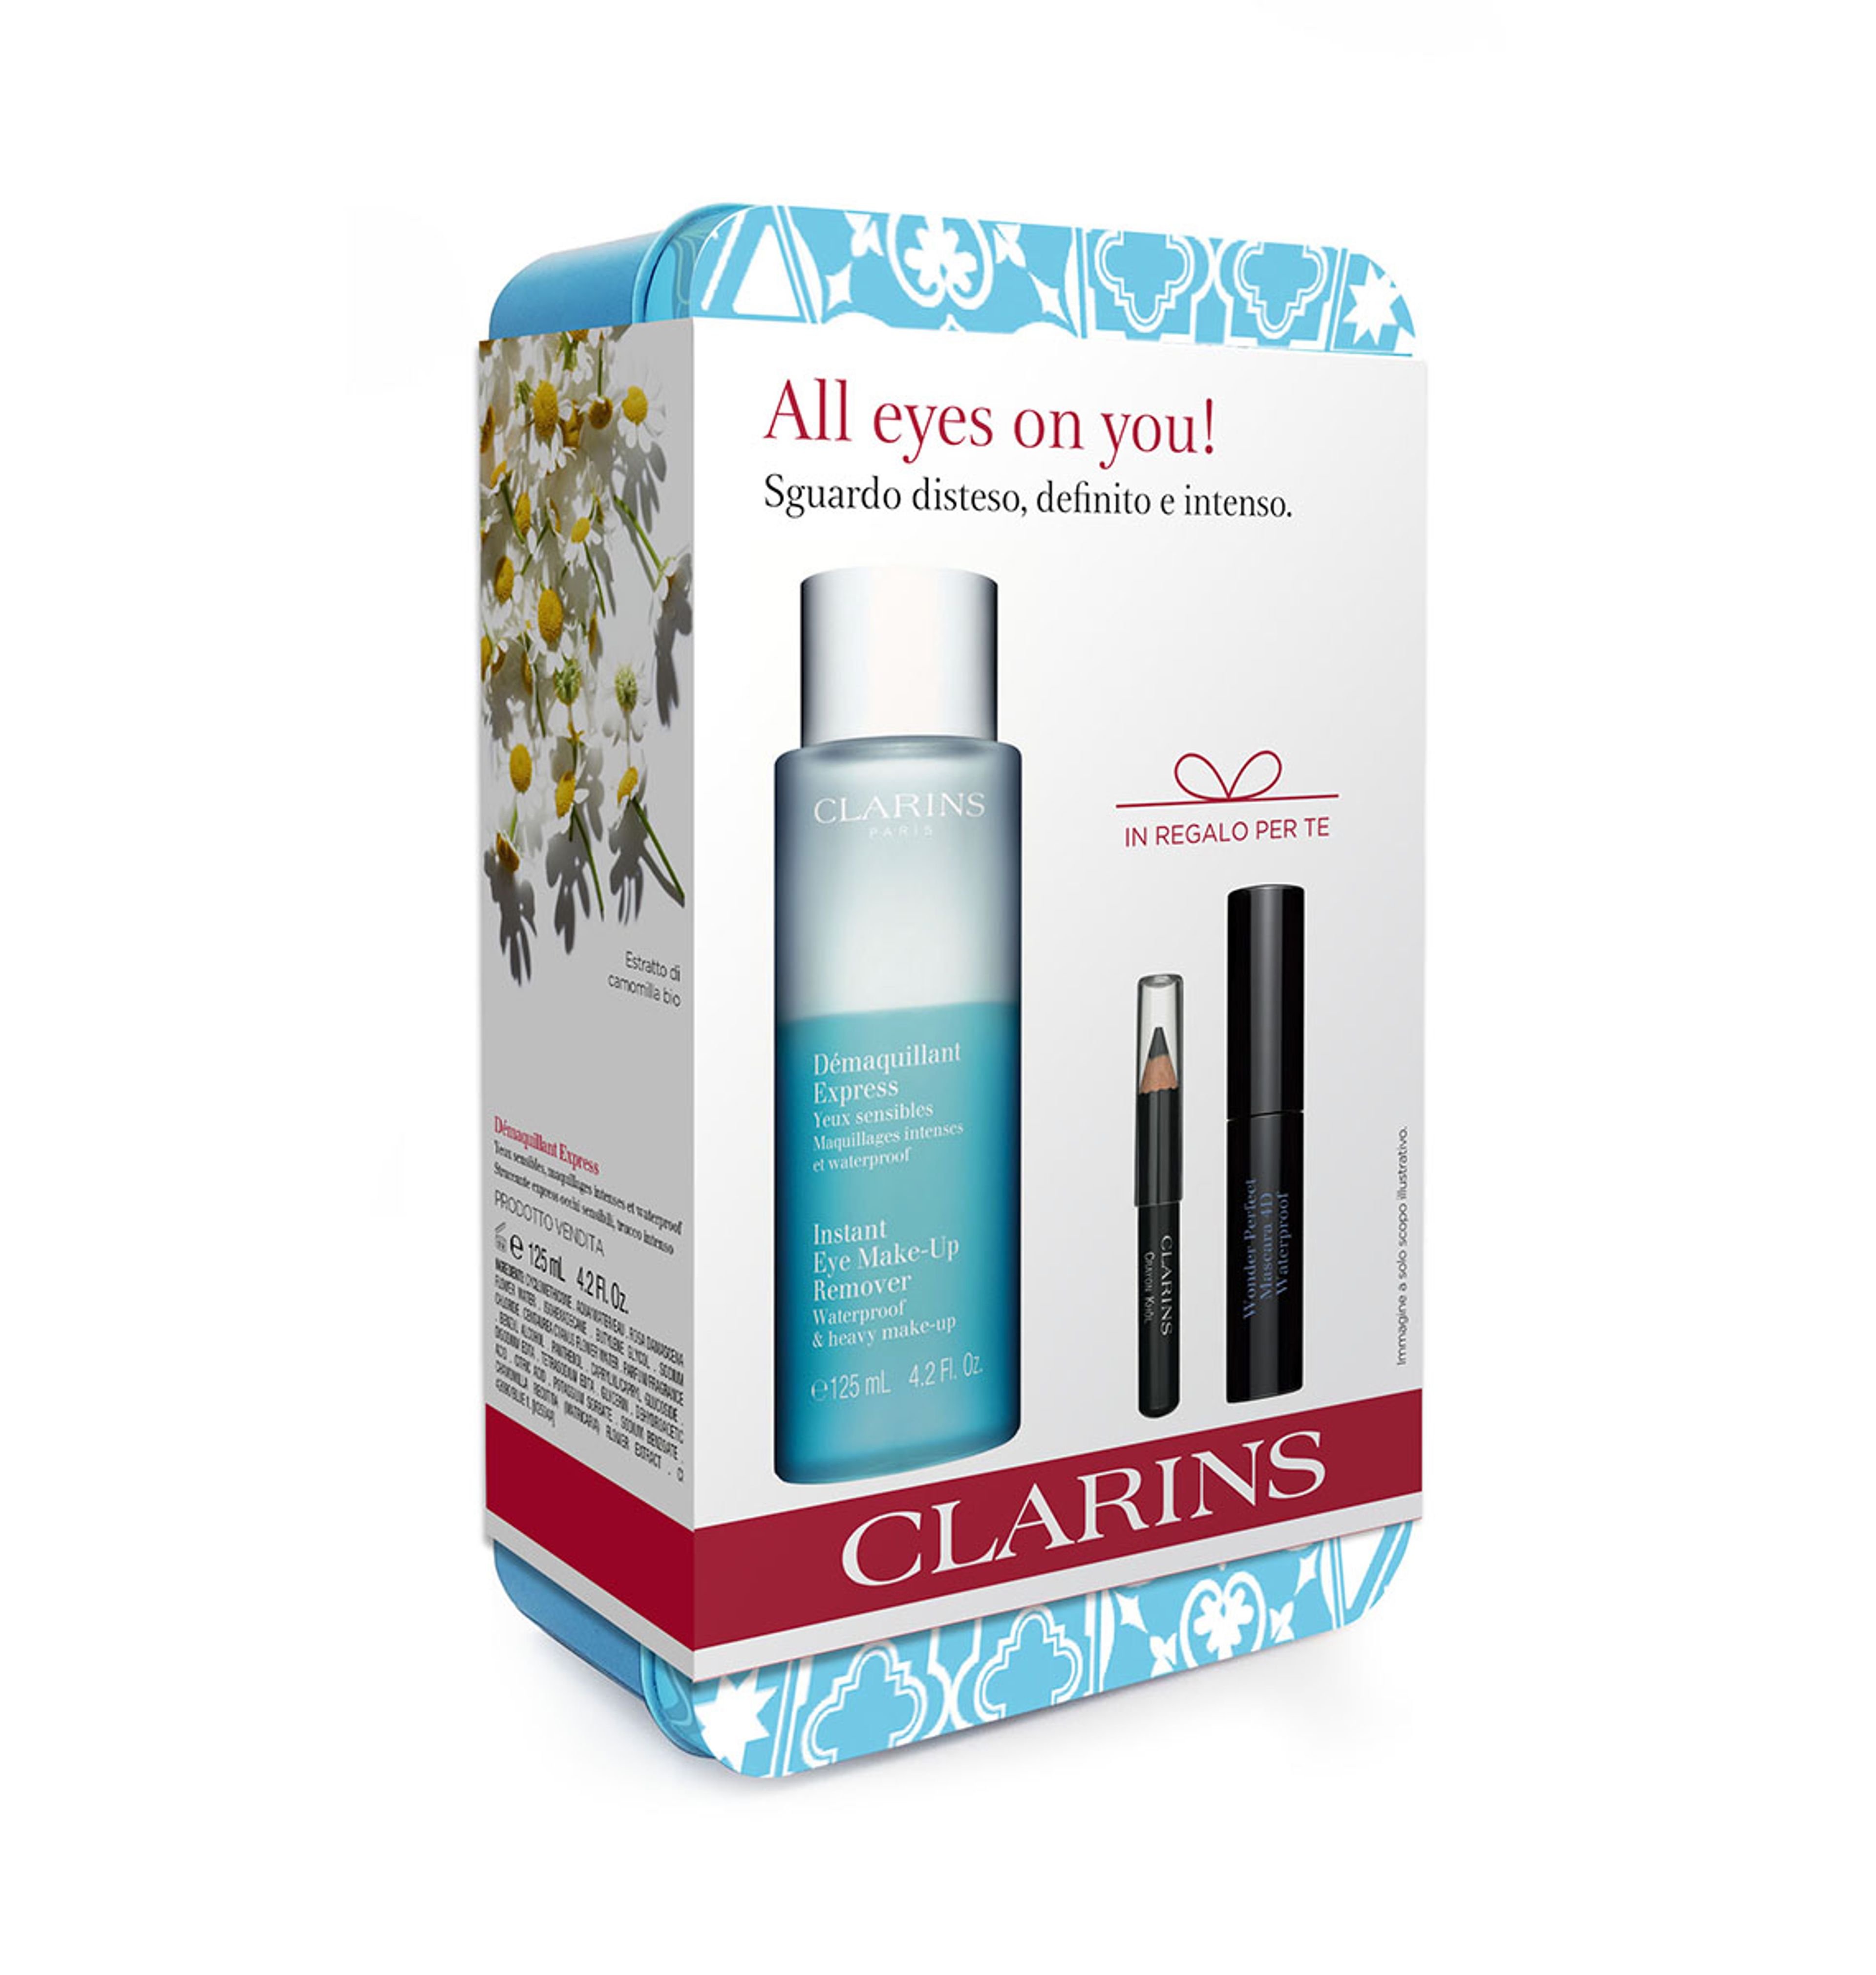 Clarins Kit All Eyes On You 2021 1